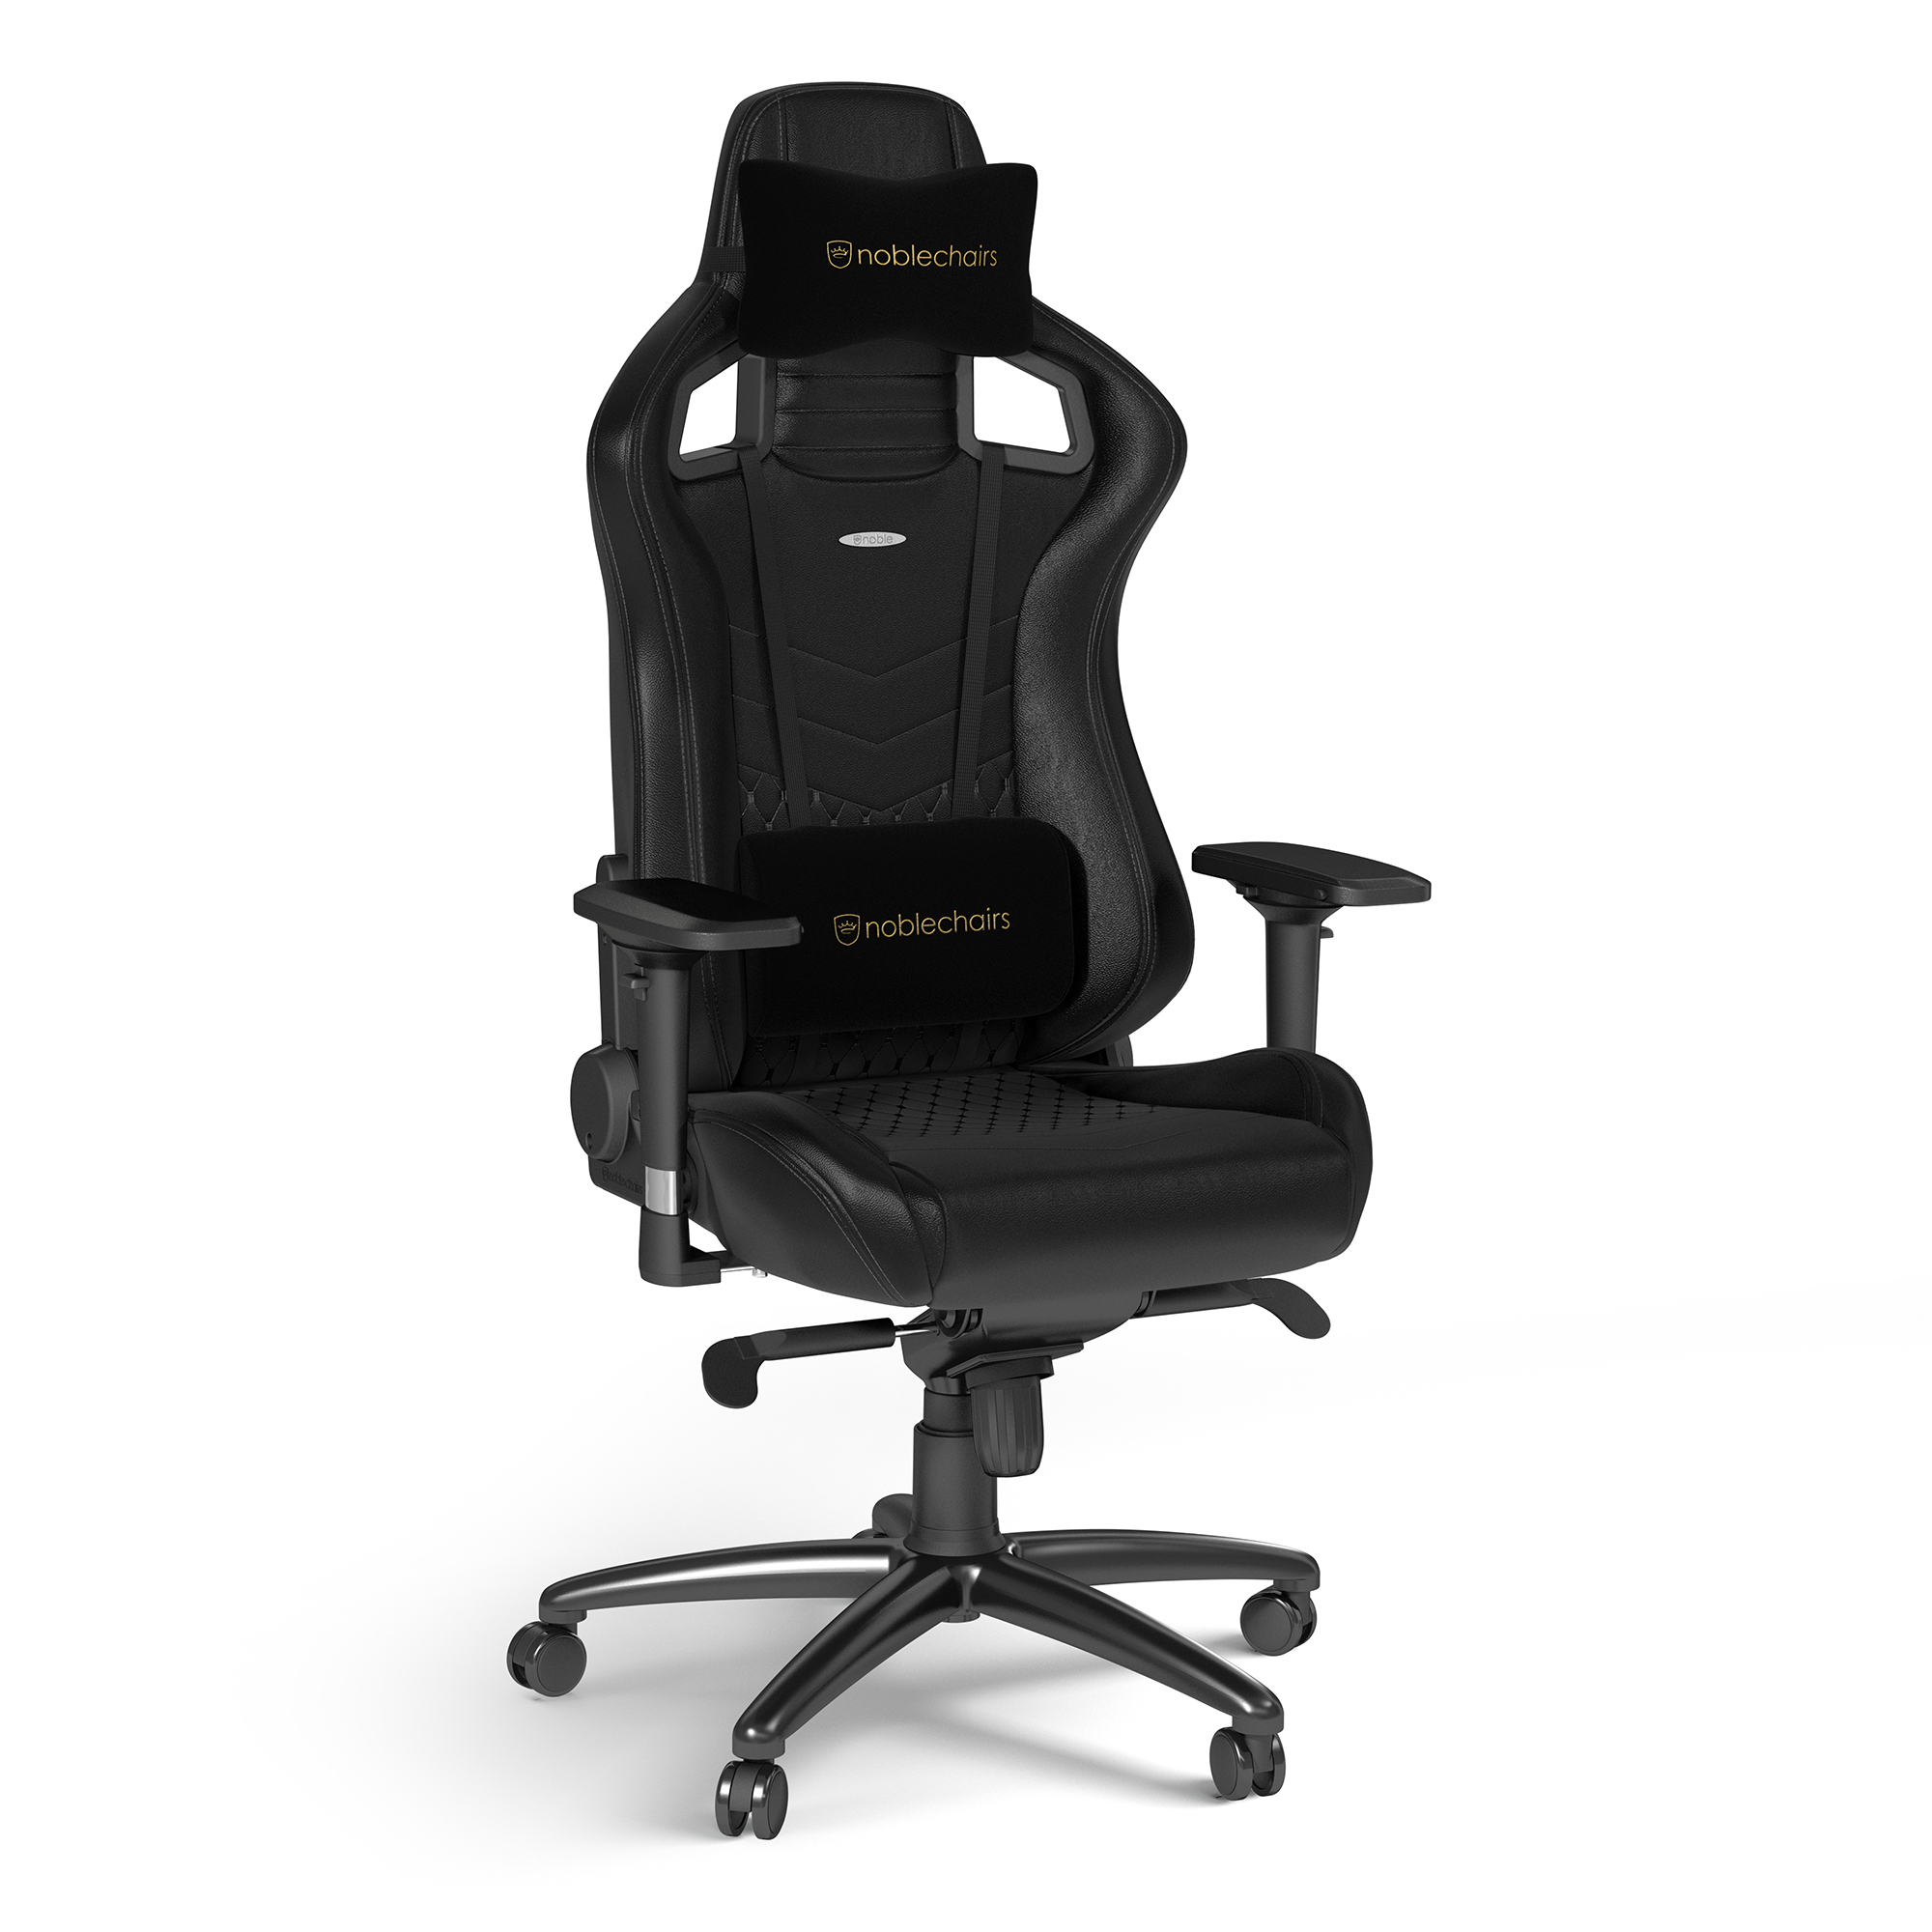 noblechairs EPIC Real Leather Gaming Chair - Black